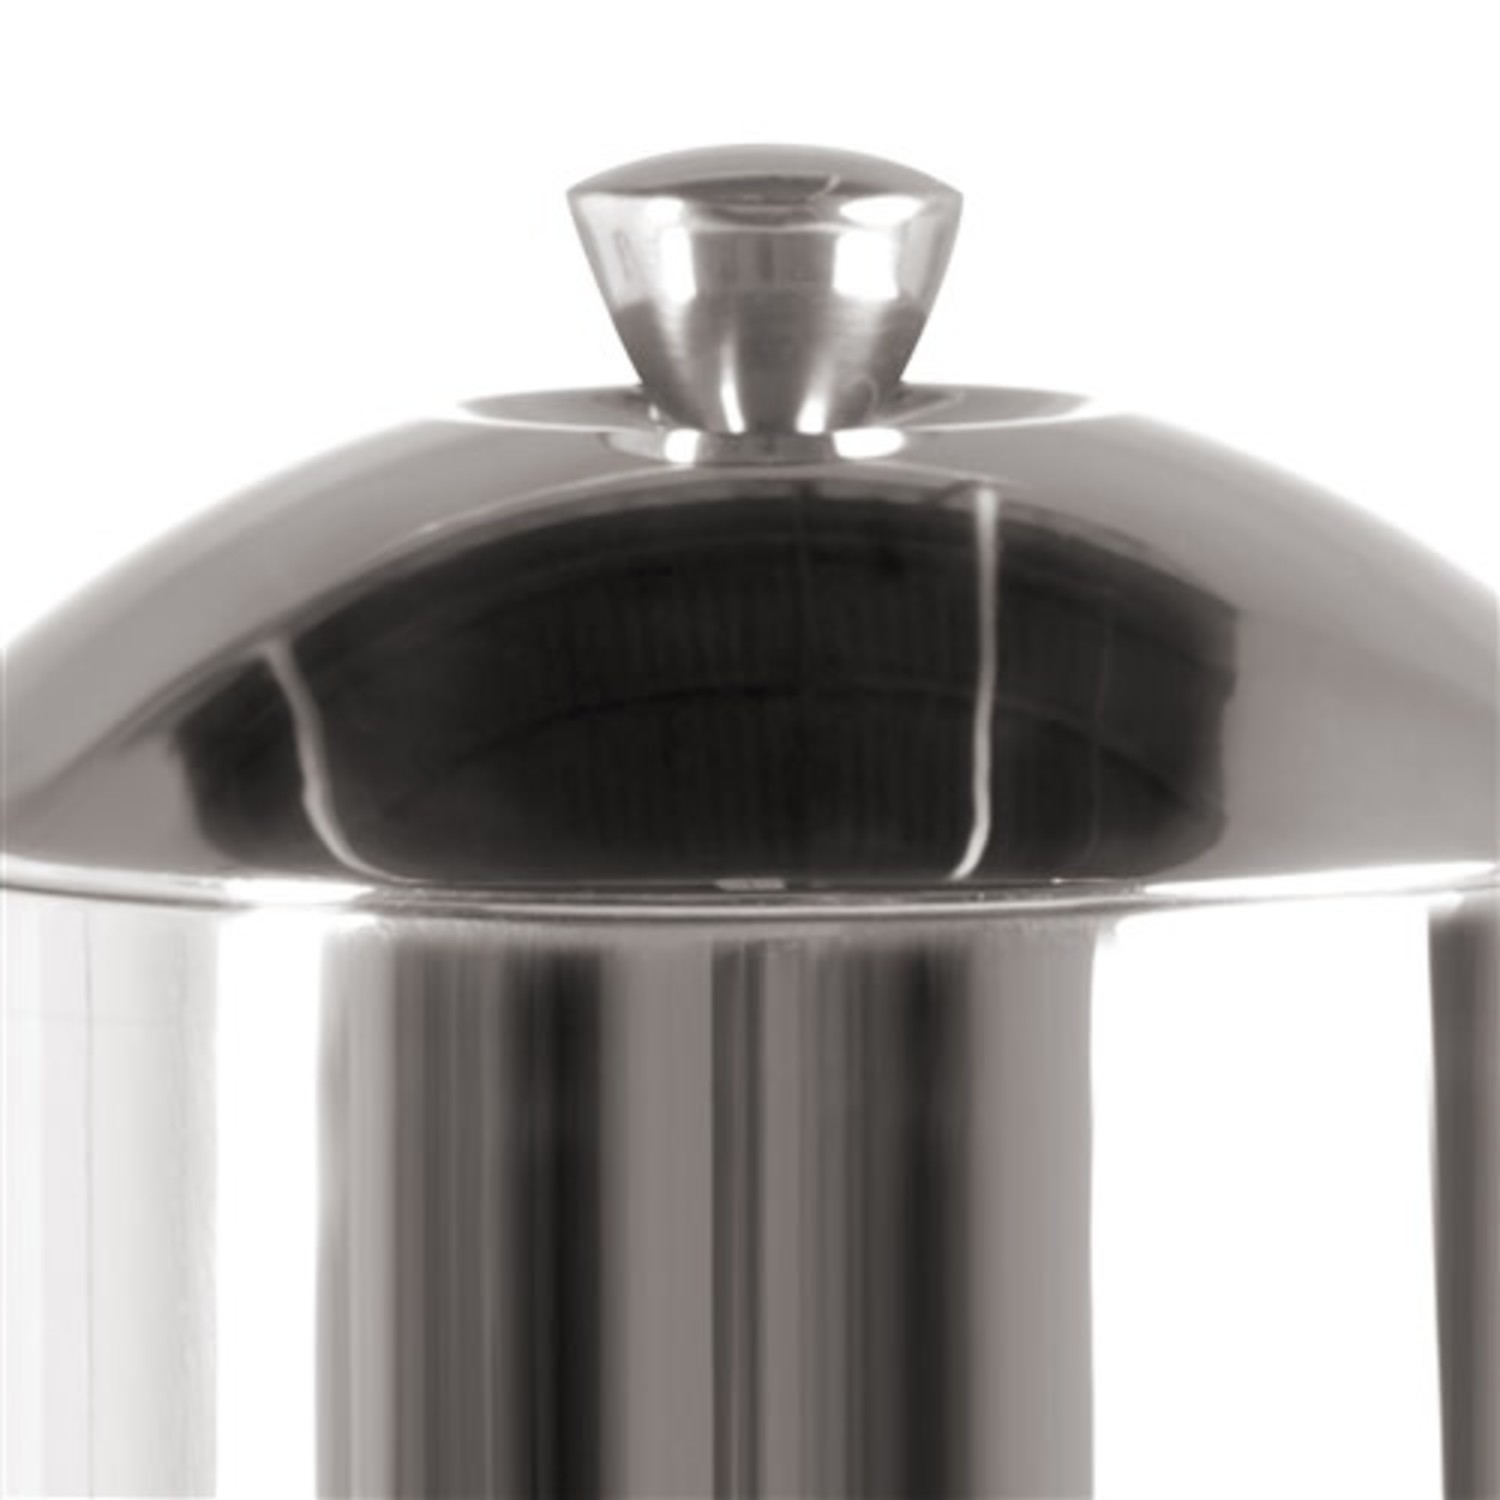 Frieling Double-Walled French Press, 6 colors, Dishwasher Safe on